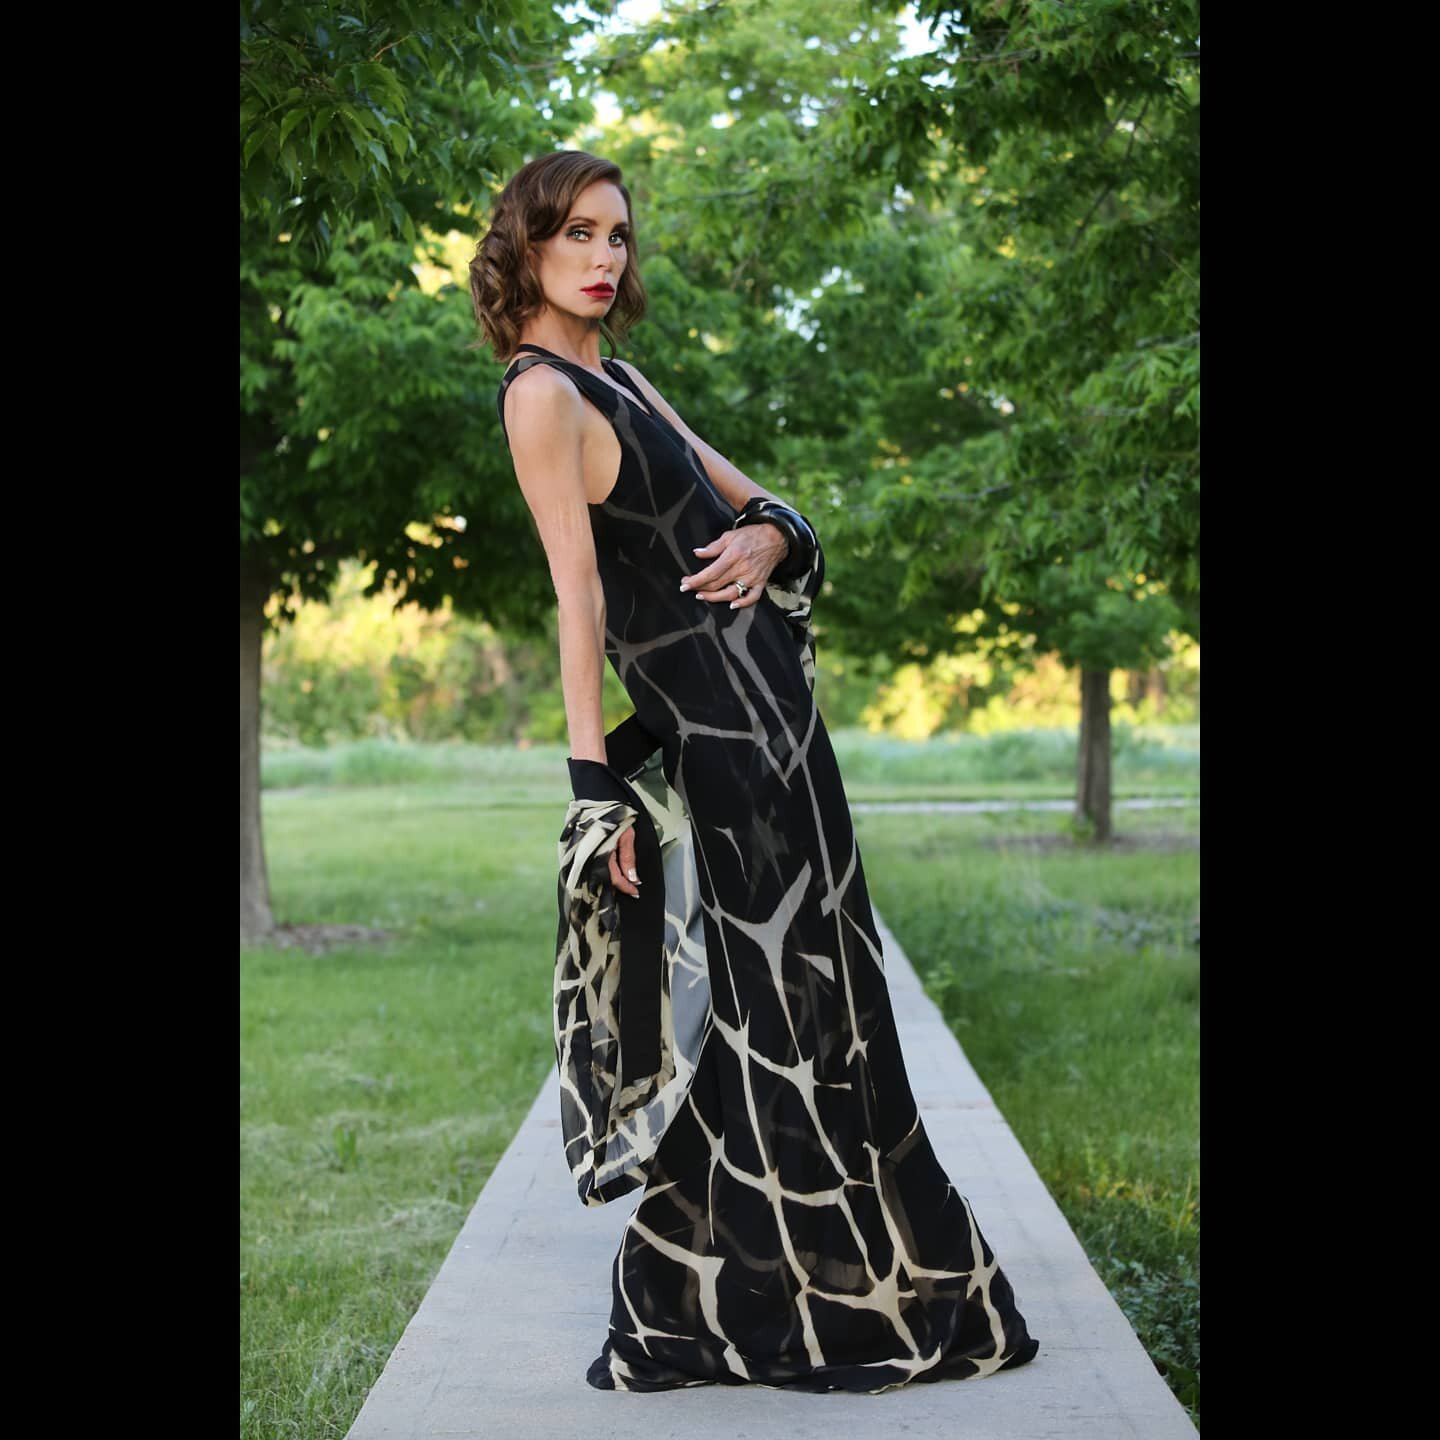 Our feature in Denver Colorado Luxury Magazine with: Model Stephanie Maner, Designer Steve Sells, Poshtography Assistant Marlene, Makeup by Savannah Appel, &amp; Hair by Mia Bethany Acers. 
.
Special thanks to Trisha Ventker @denvercoloradoluxurymaga